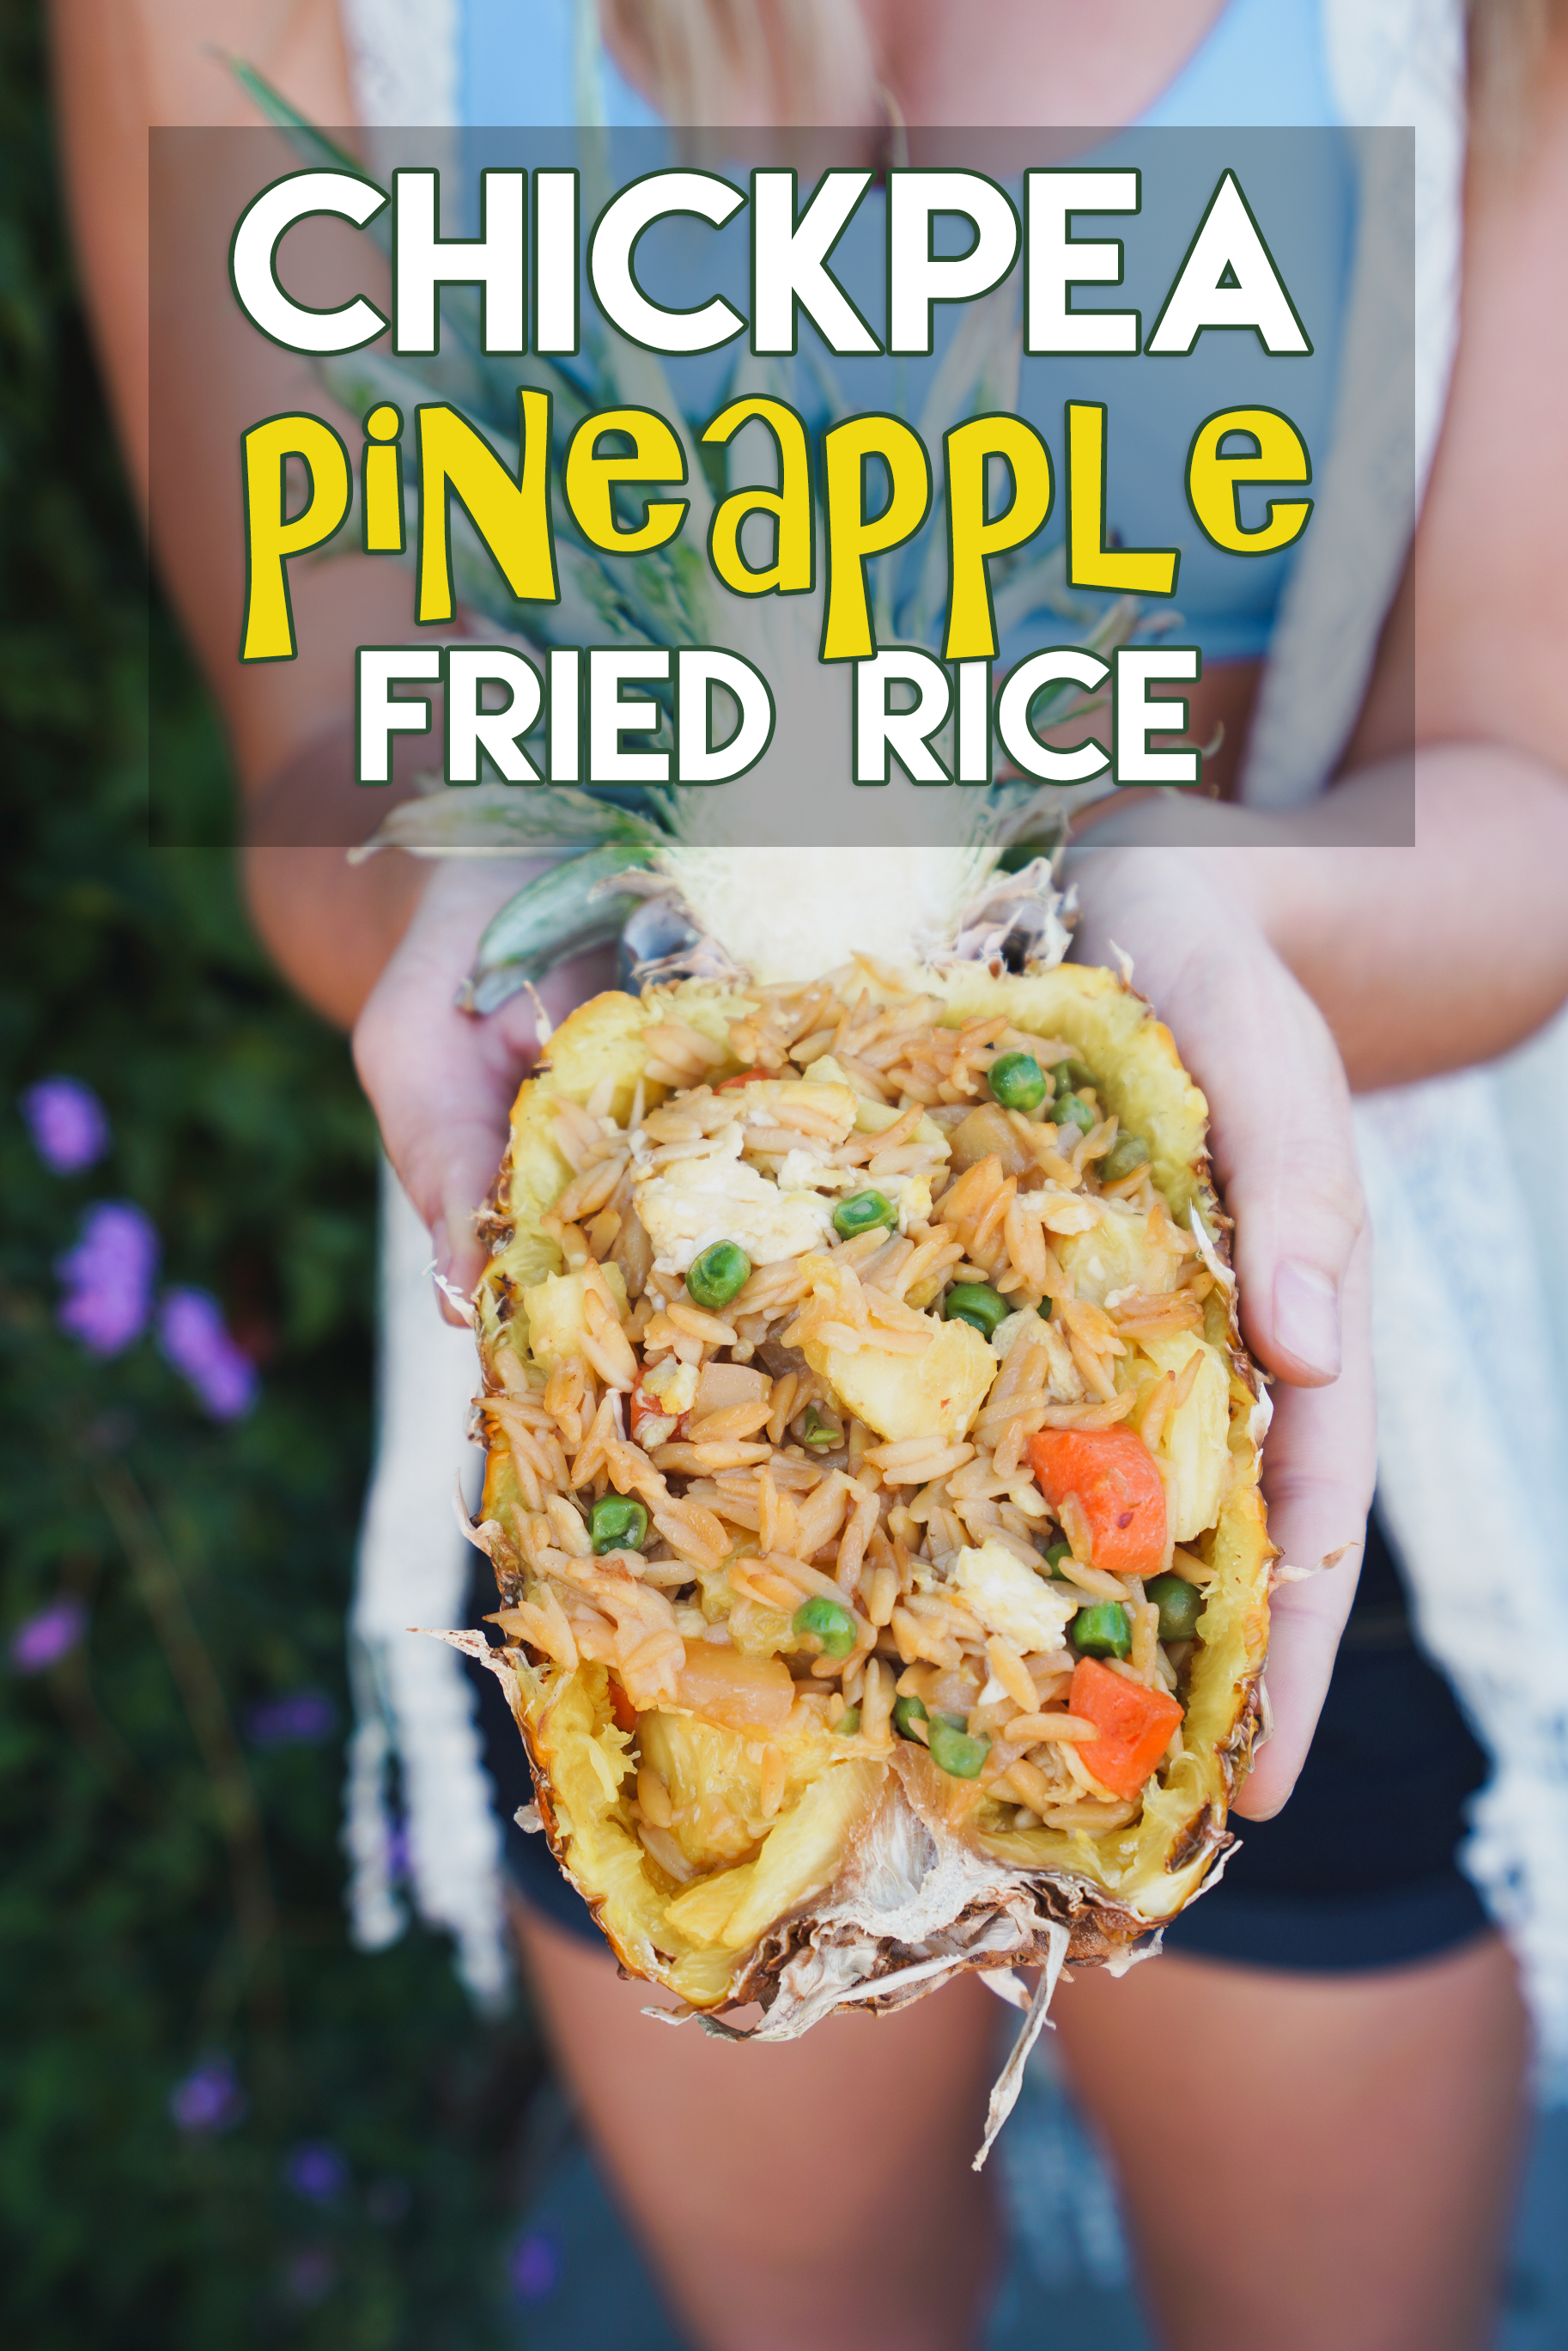 Chickpea Pineapple Fried Rice